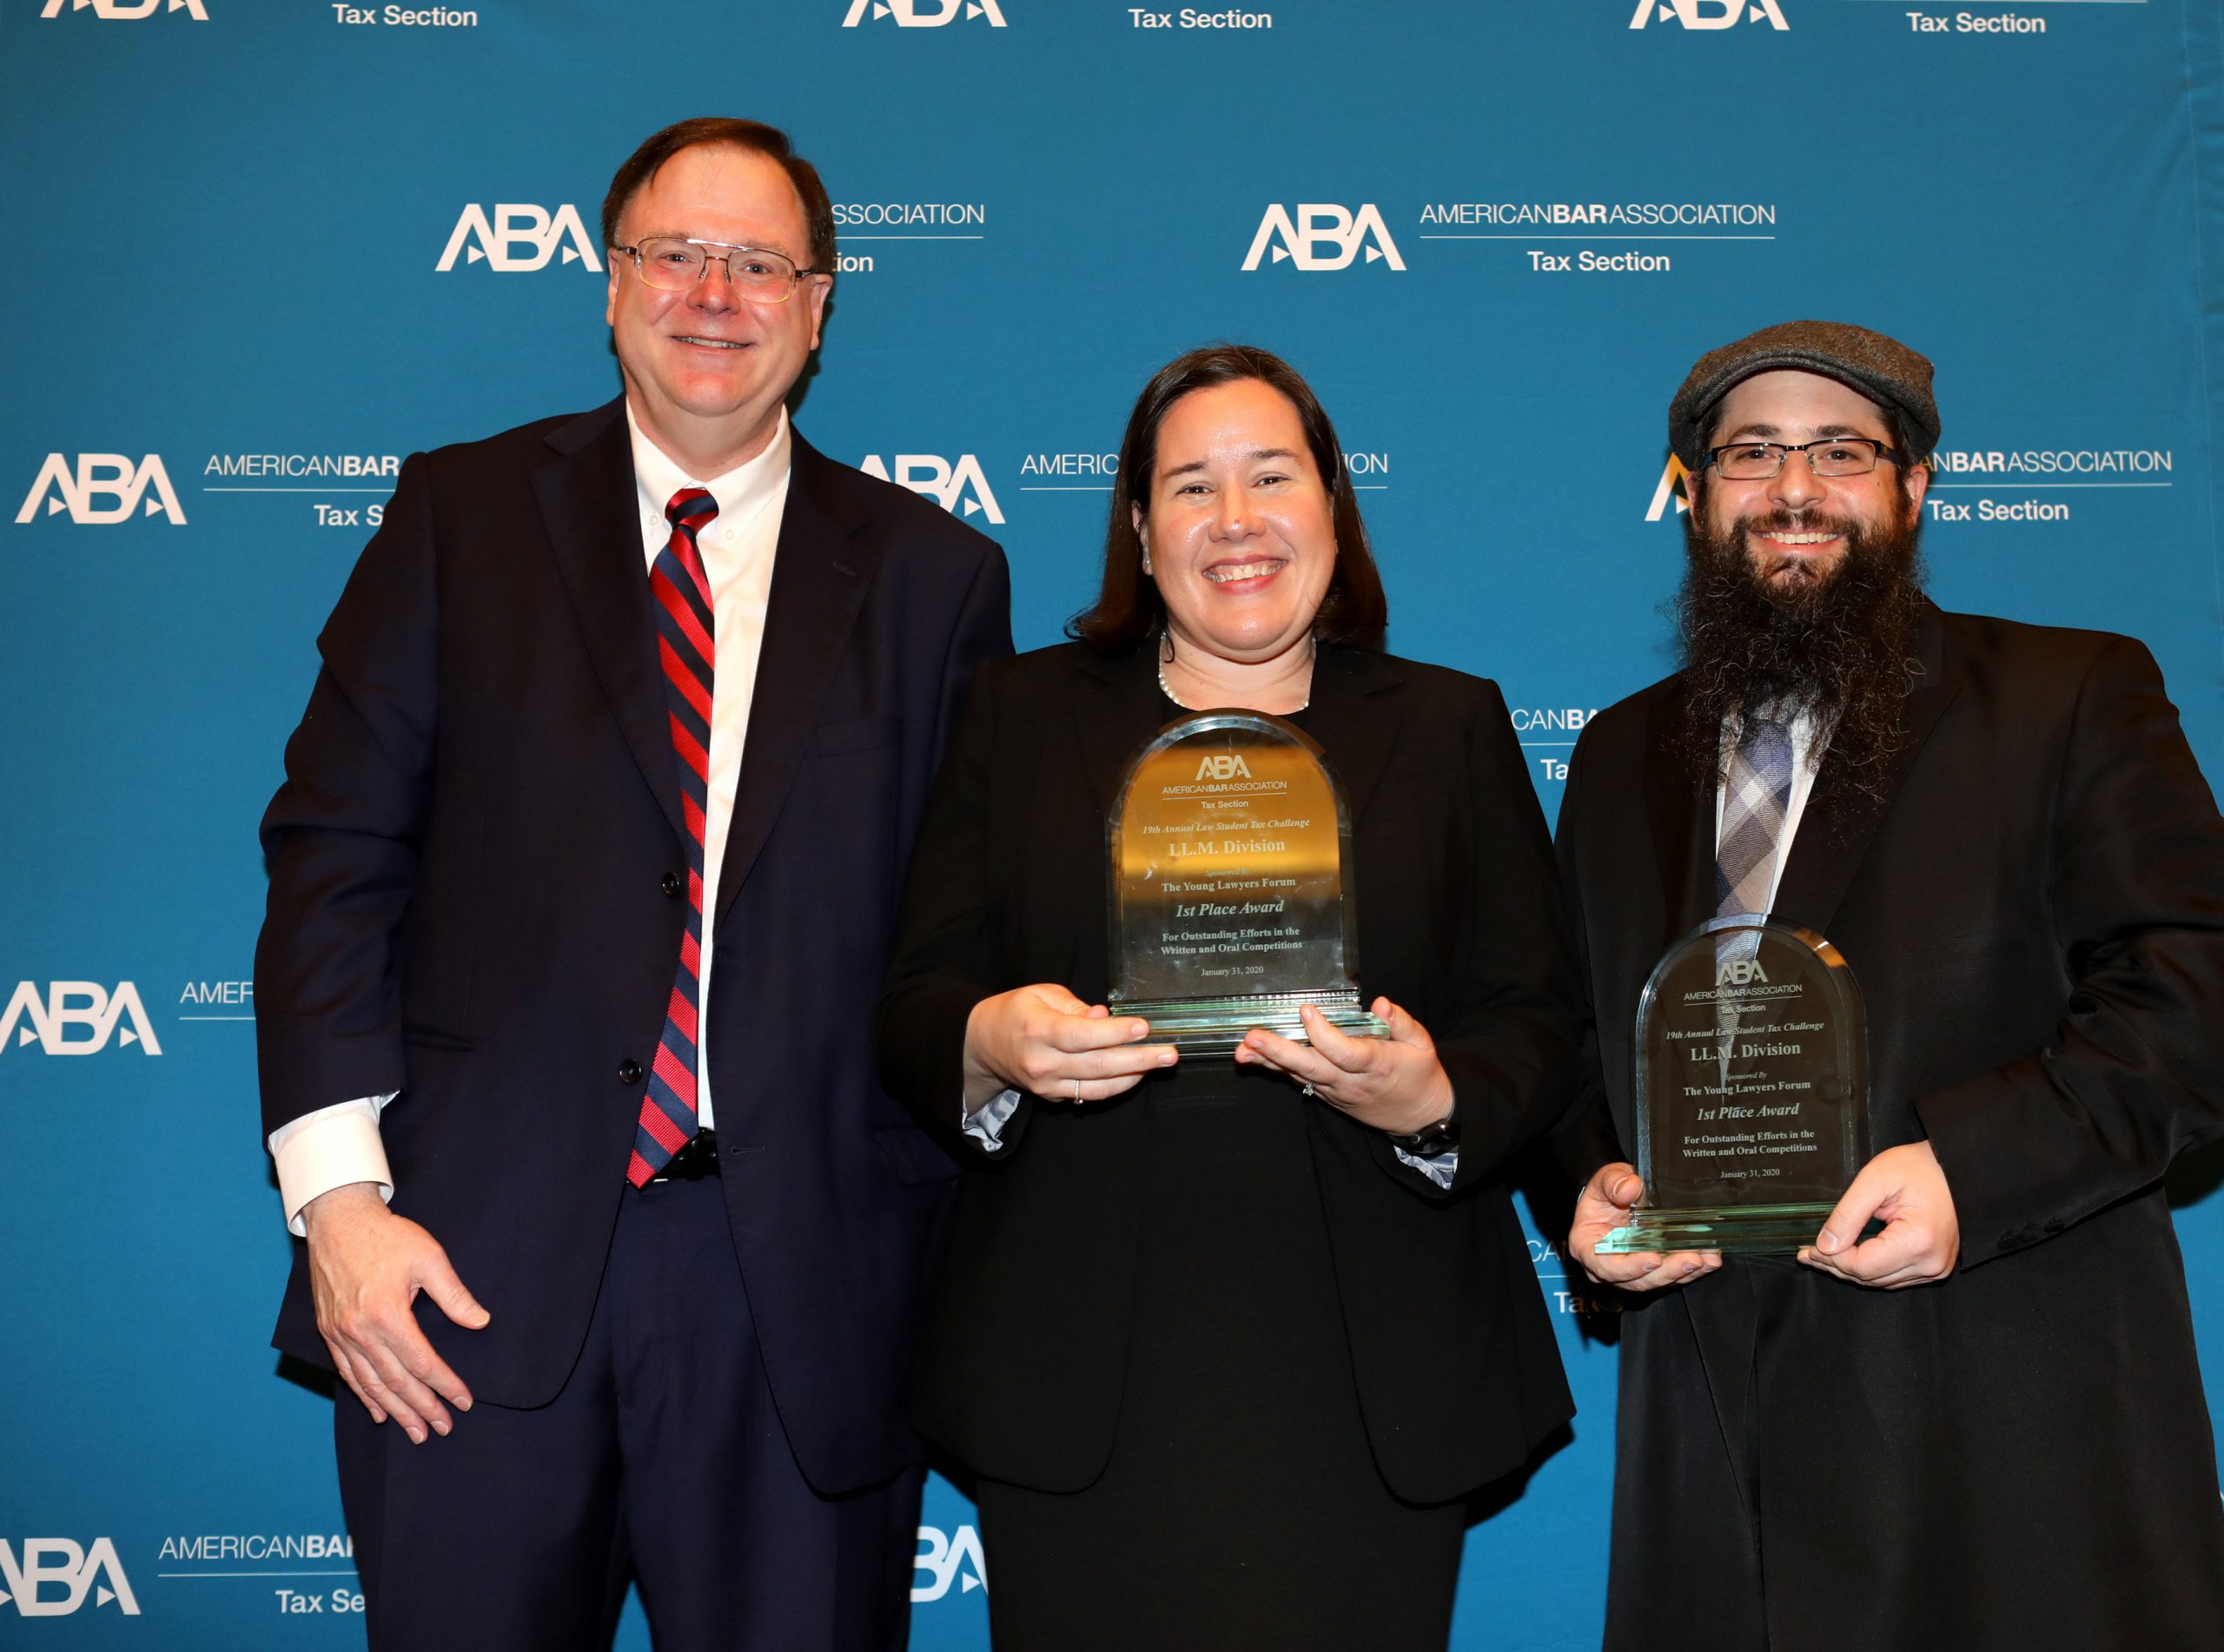 Temple Team Wins FIRST PLACE in the ABA Tax Section's Law Student Tax Challenge, LLM Division